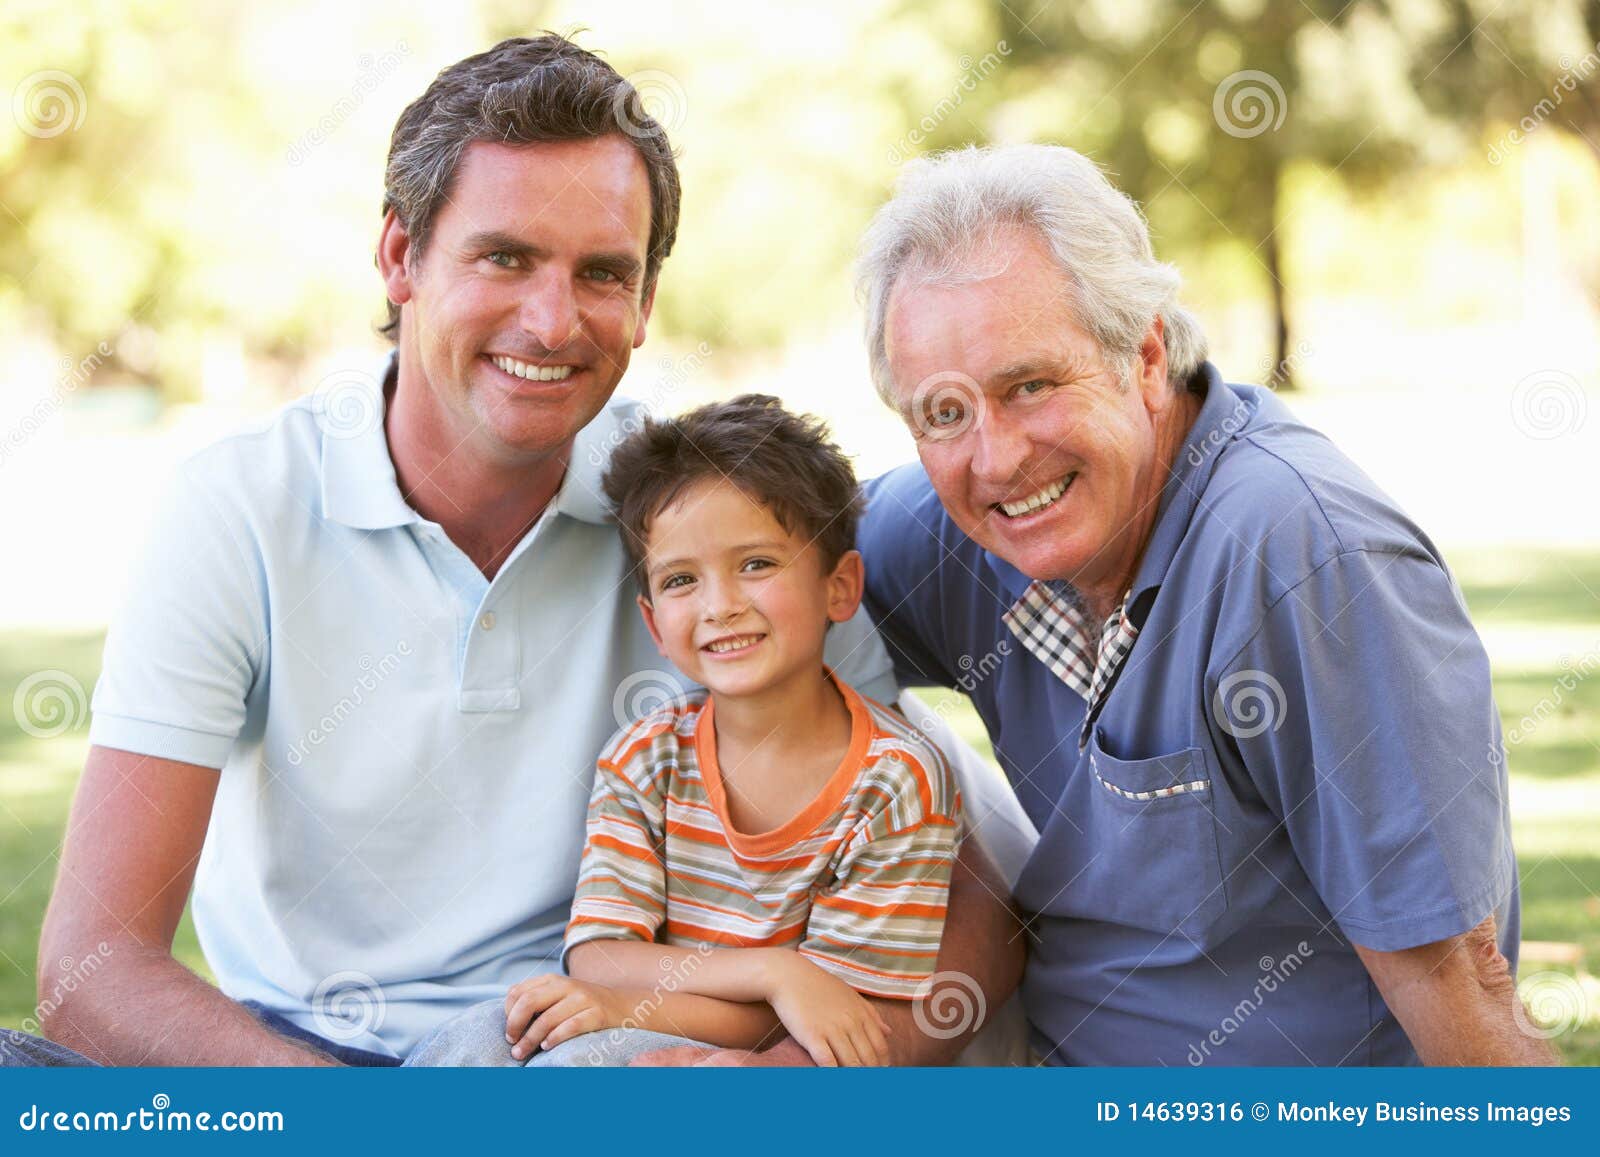 grandfather with father and son in park